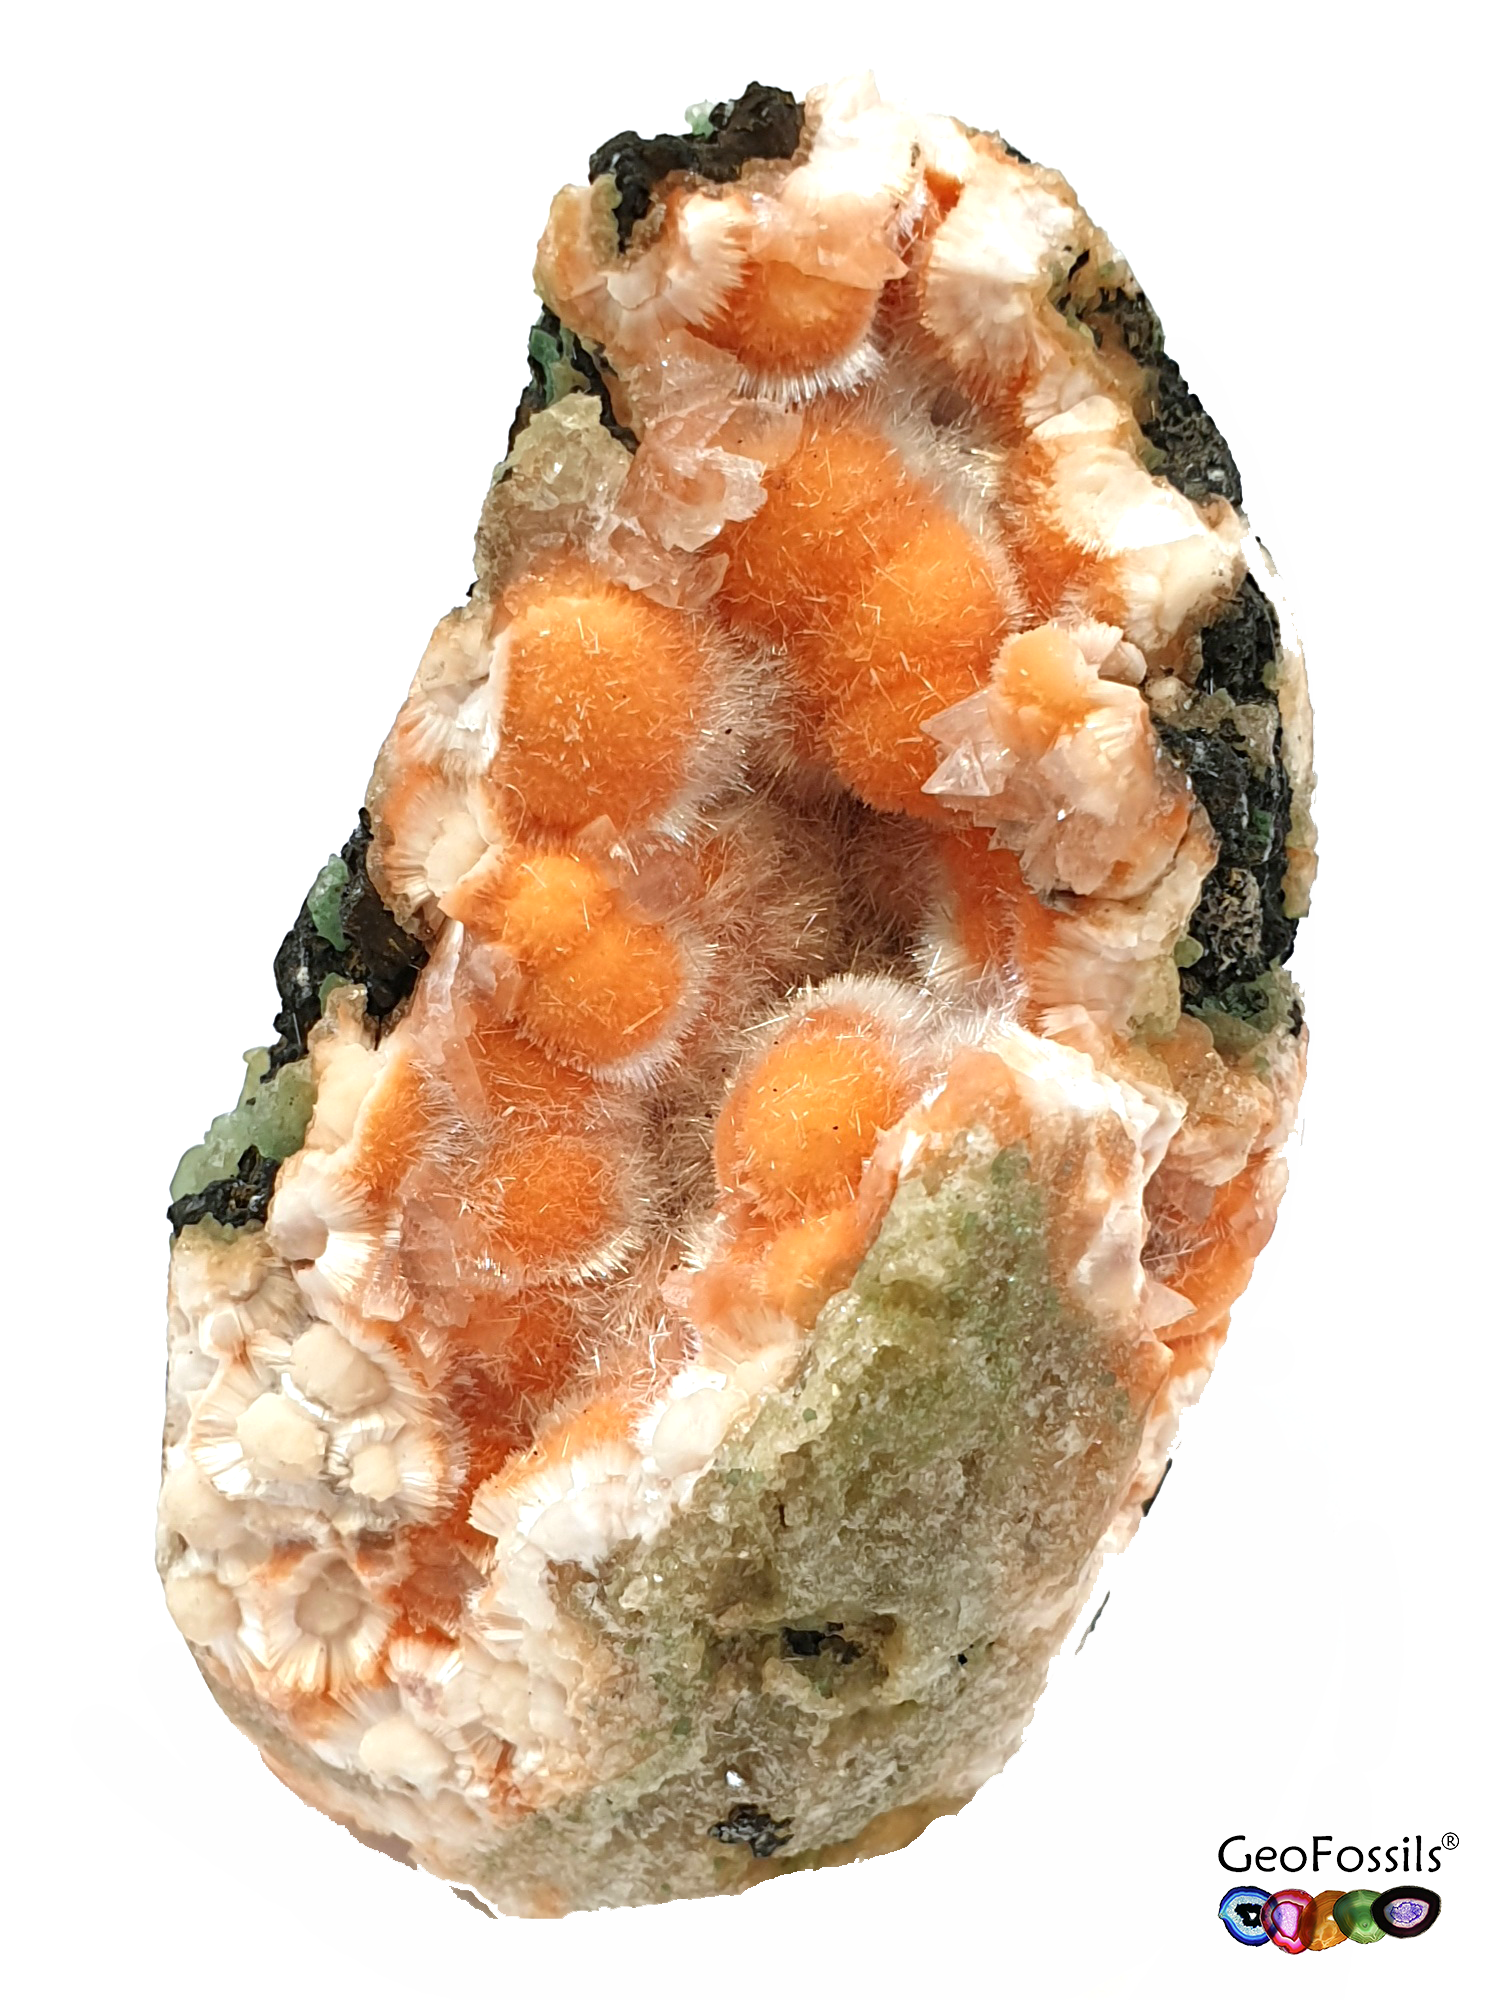 GeoFossils Thomsonite with Mesolite and Apophyllite